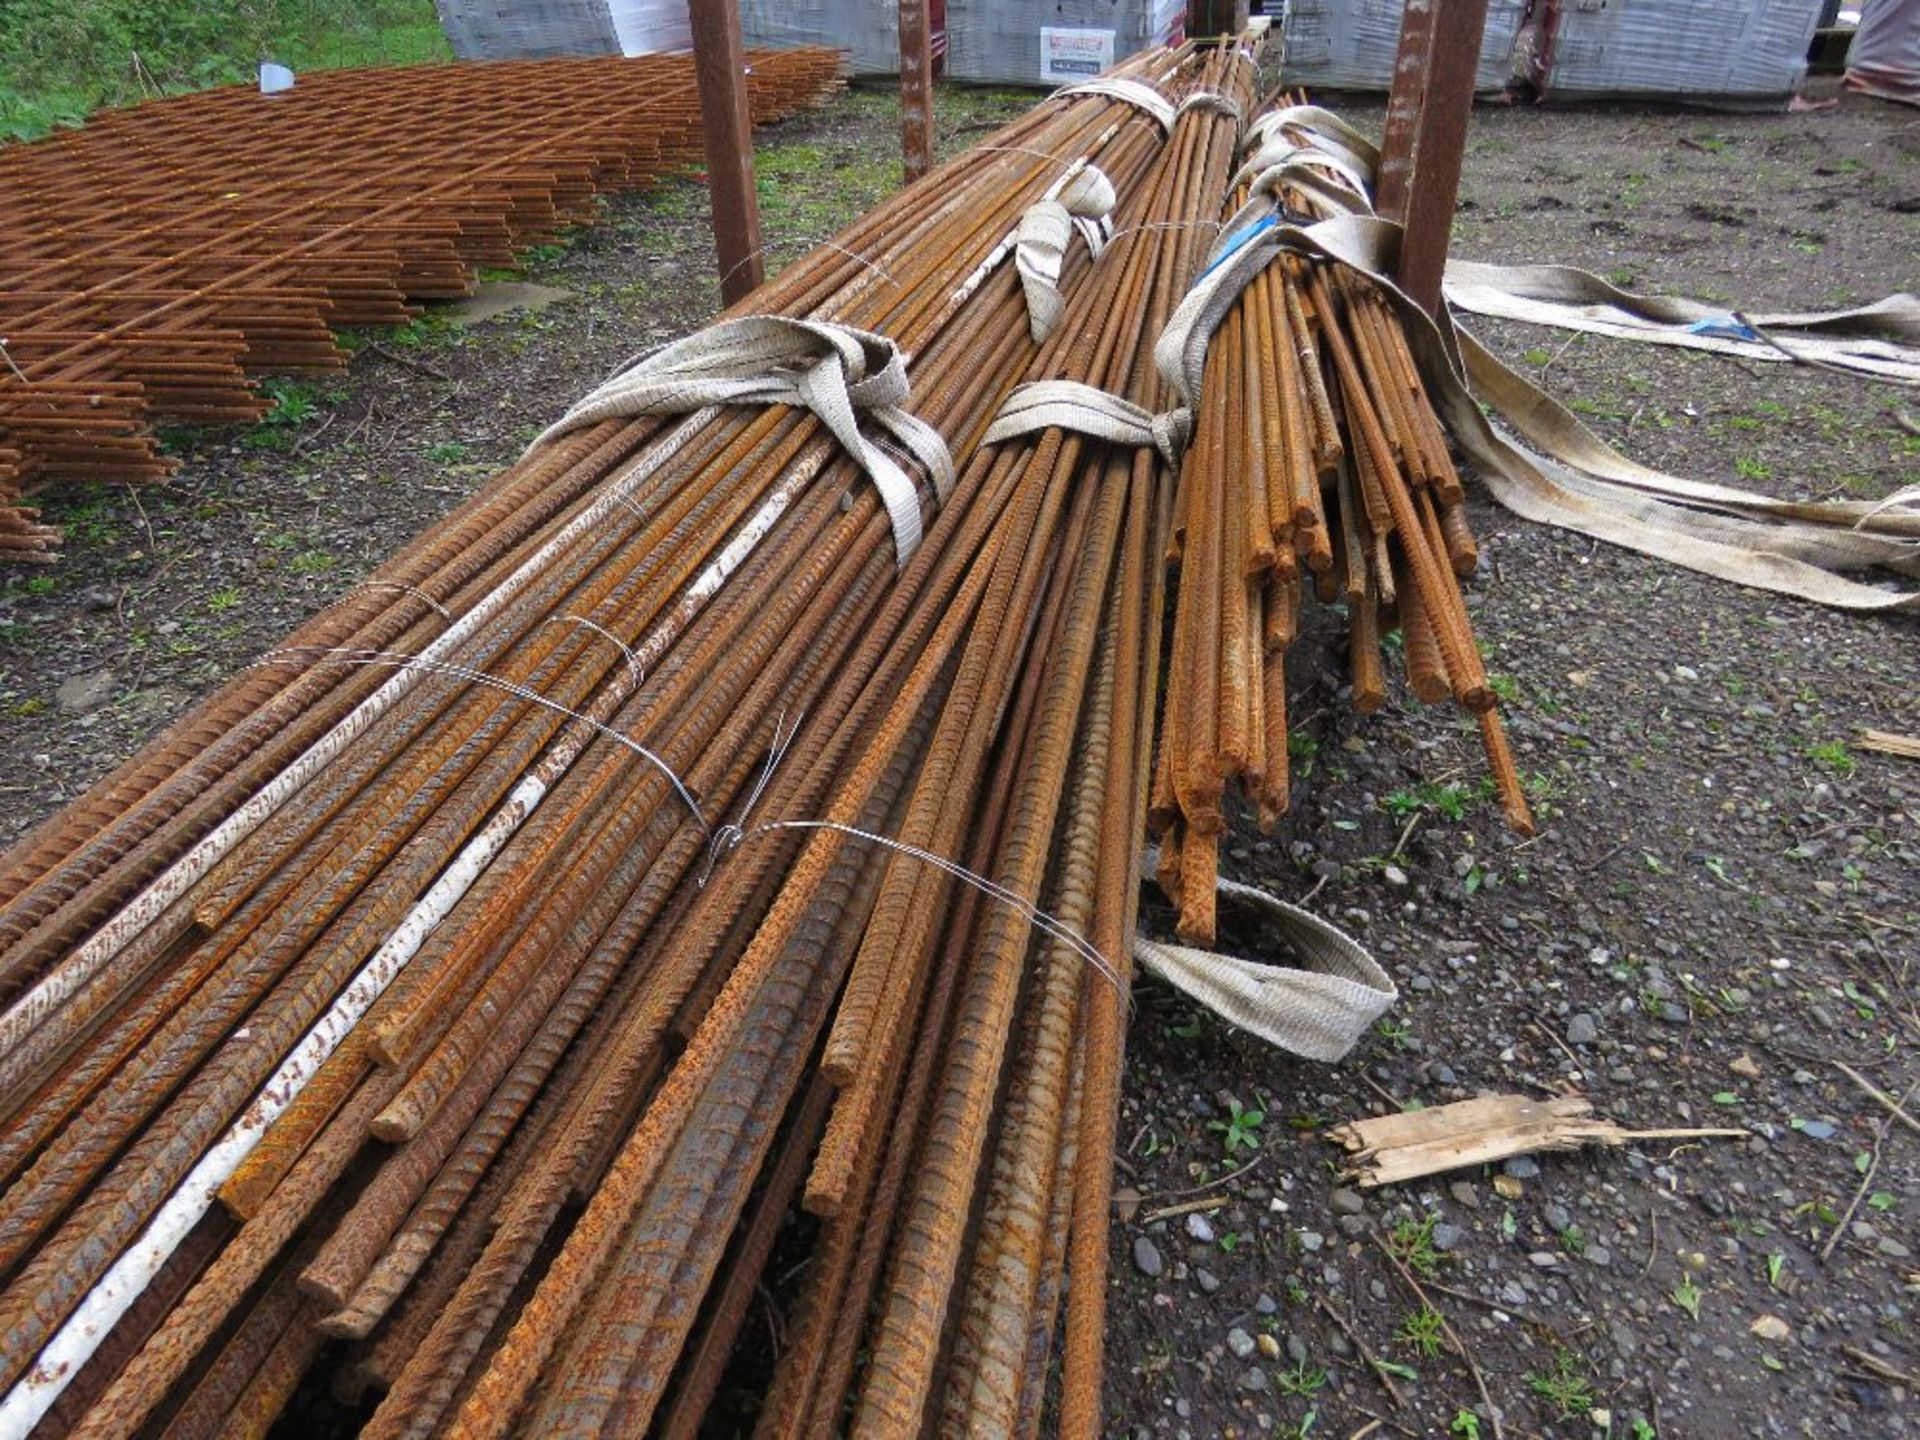 STILLAGE OF ASSORTED REBAR CONCRETE REINFORCING BAR 6FT -22FT APPROX SOURCED FROM COMPANY LIQUIDATI - Image 3 of 7